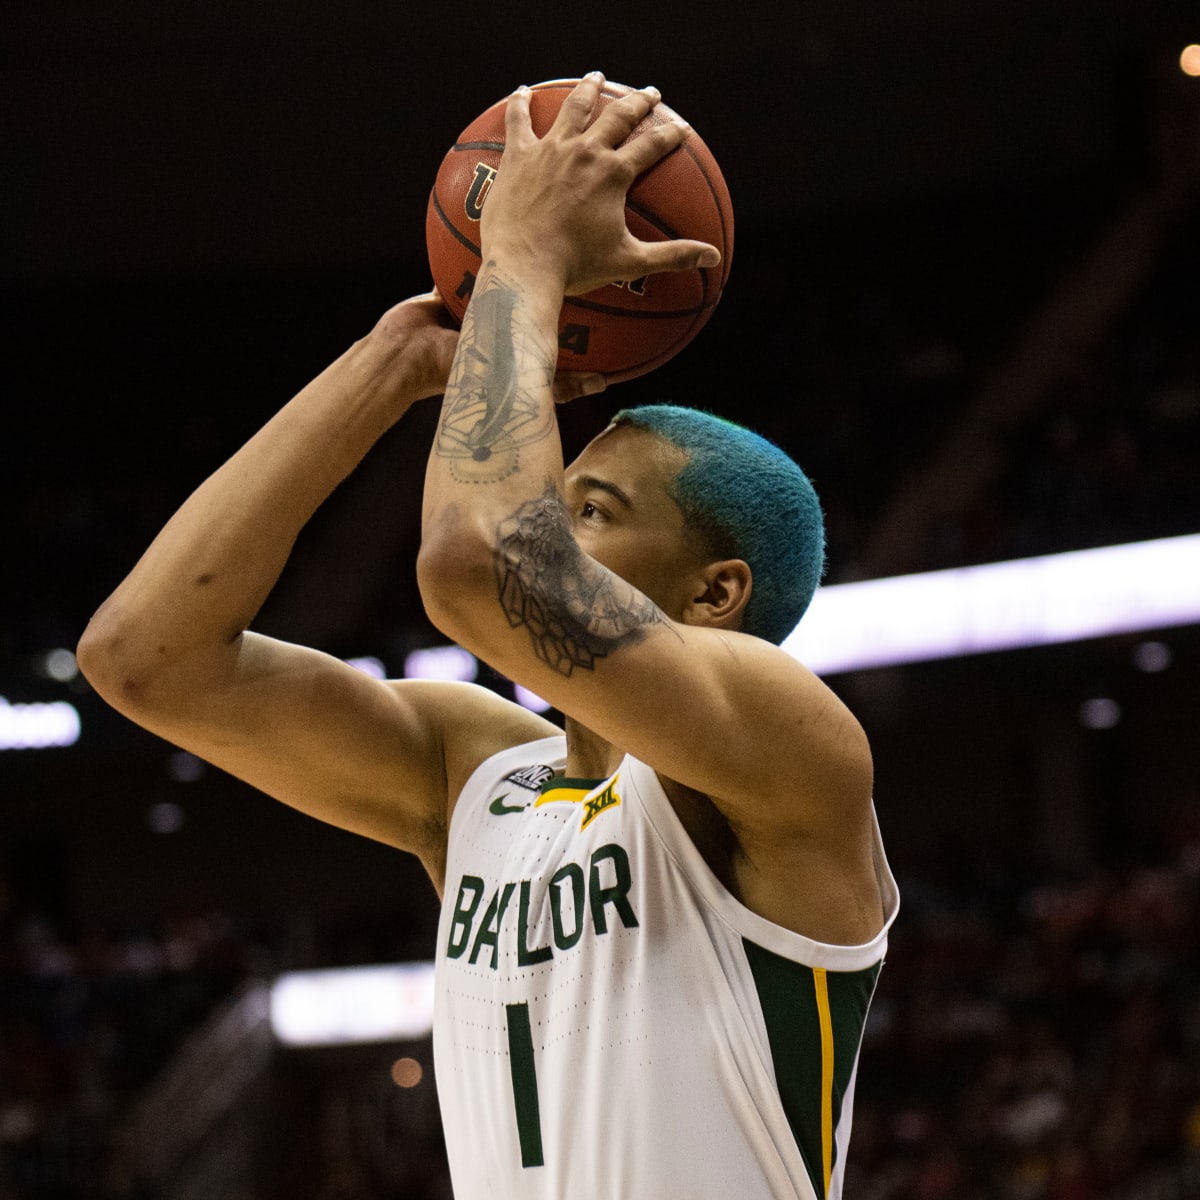 BaylorProud » Baylor's Sochan goes No. 9 overall in 2022 NBA draft